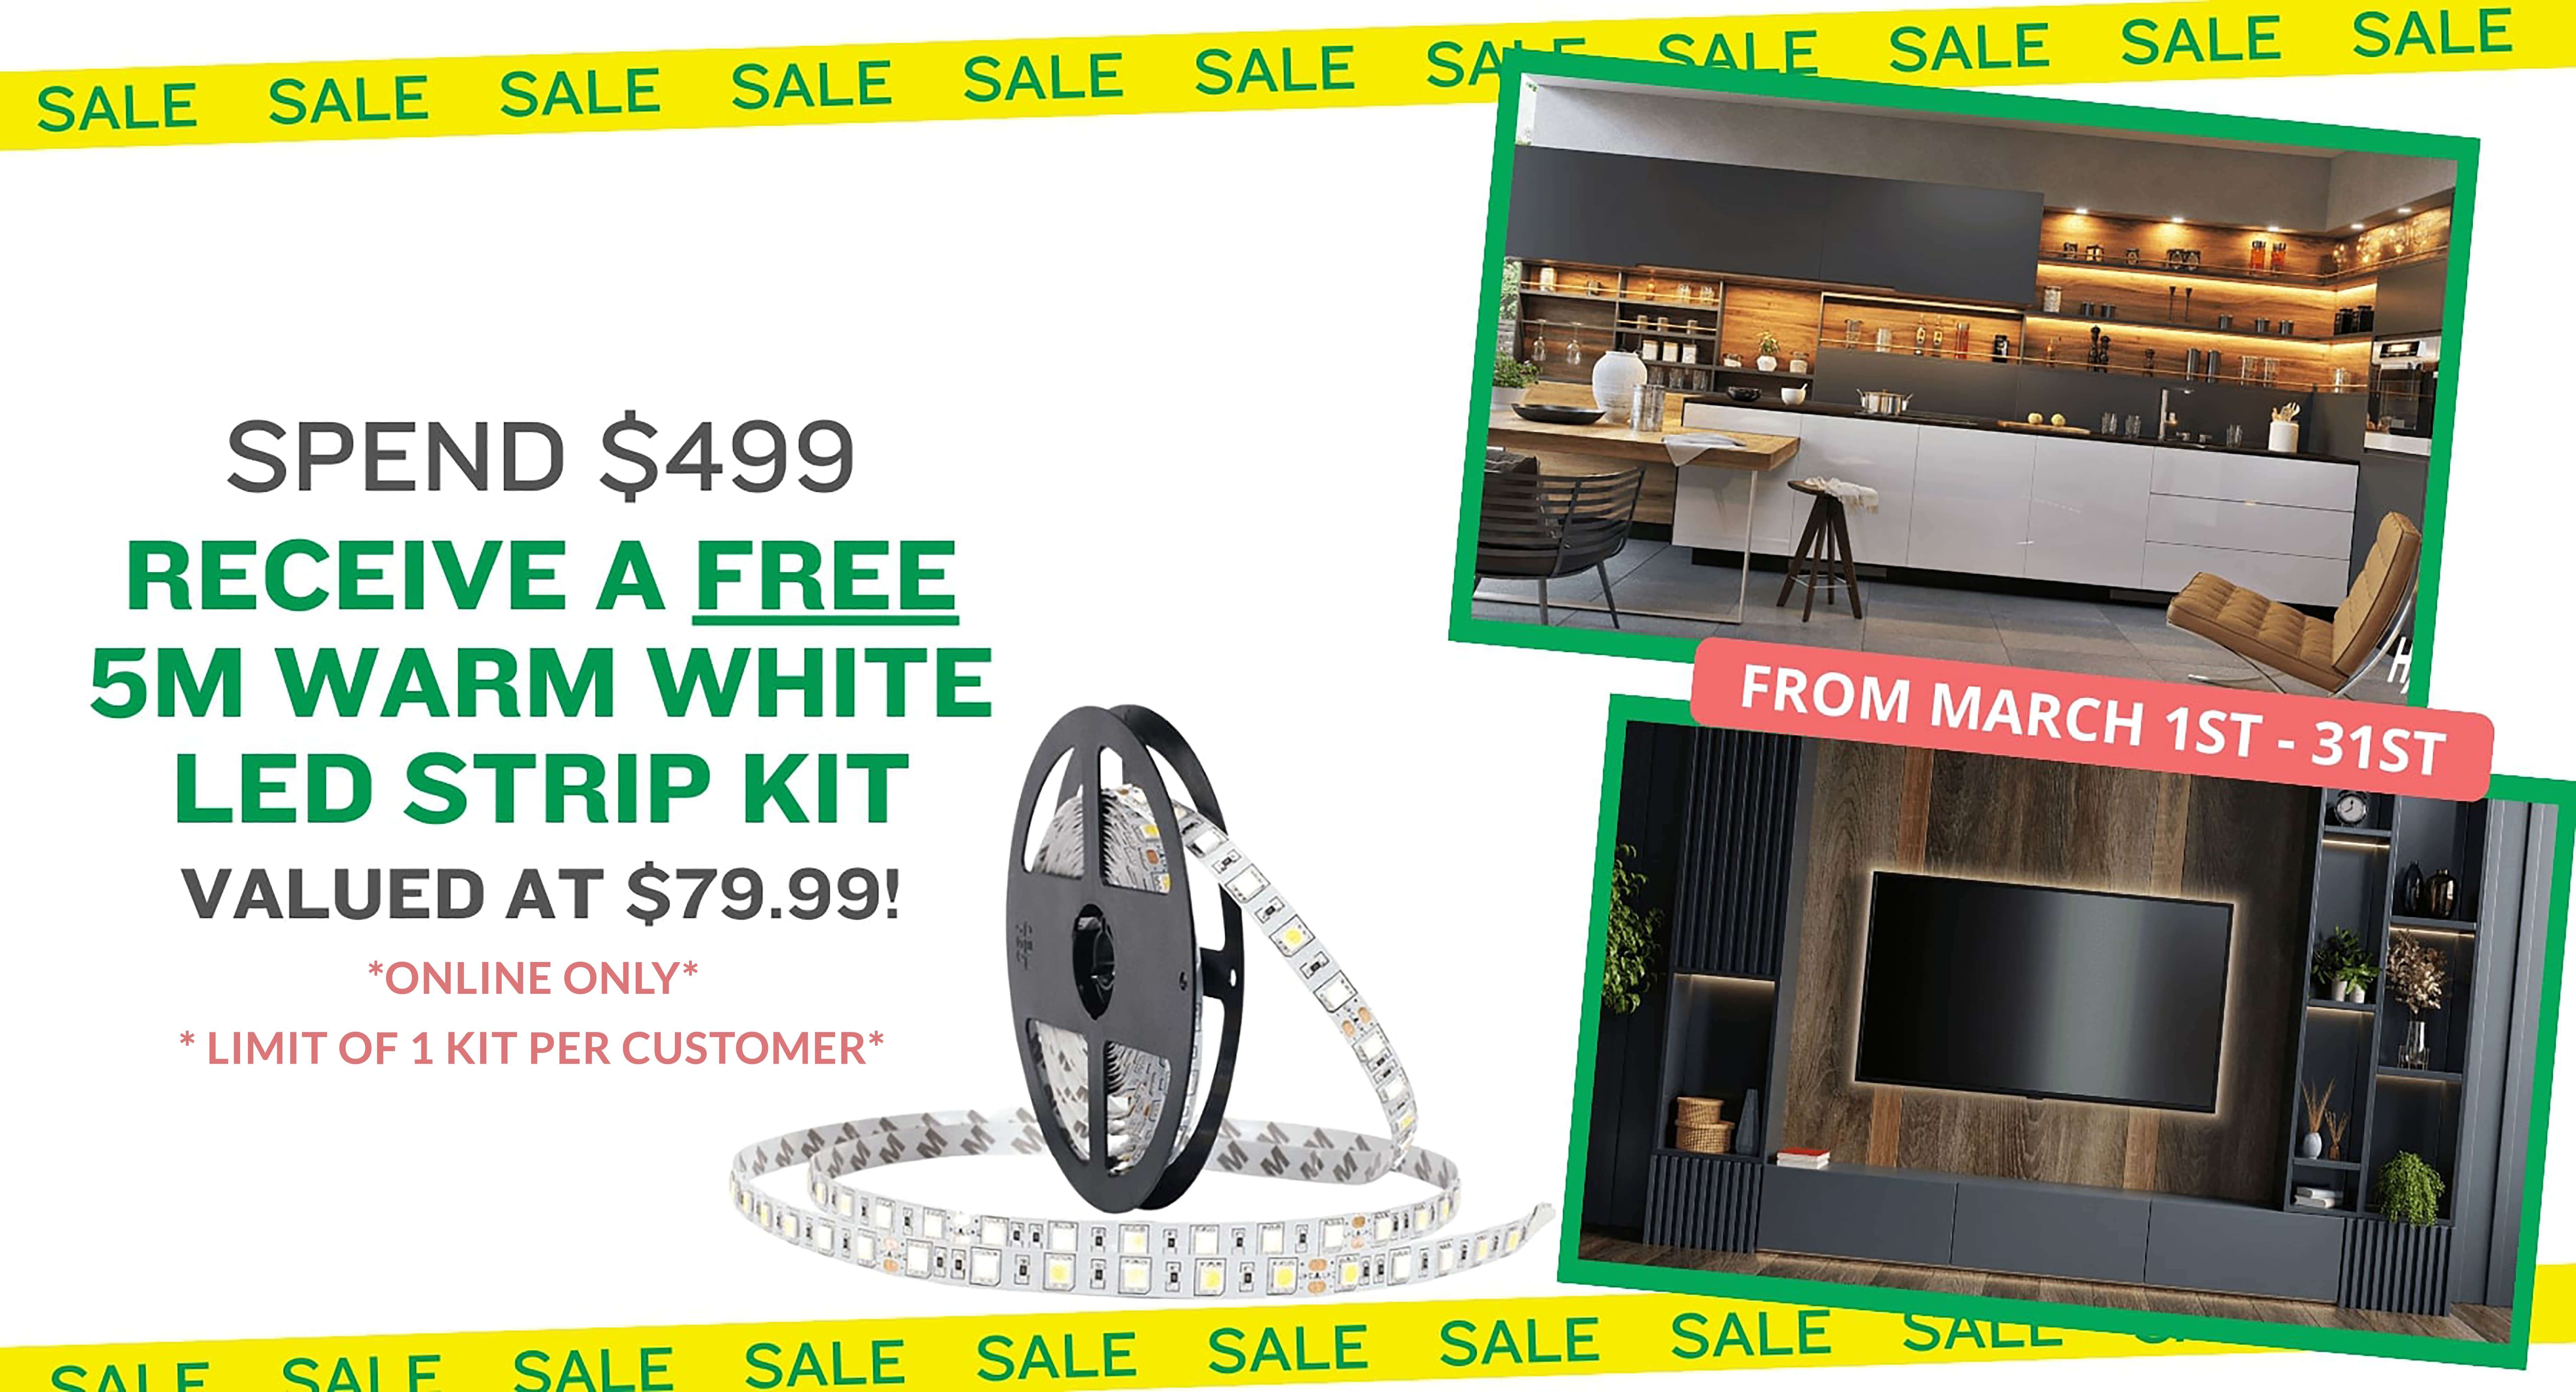 SPEND $499 RECEIVE A FREE 5M WARM WHITE LED STRIP KIT VALUED AT $79.99! *ONLINE ONLY*